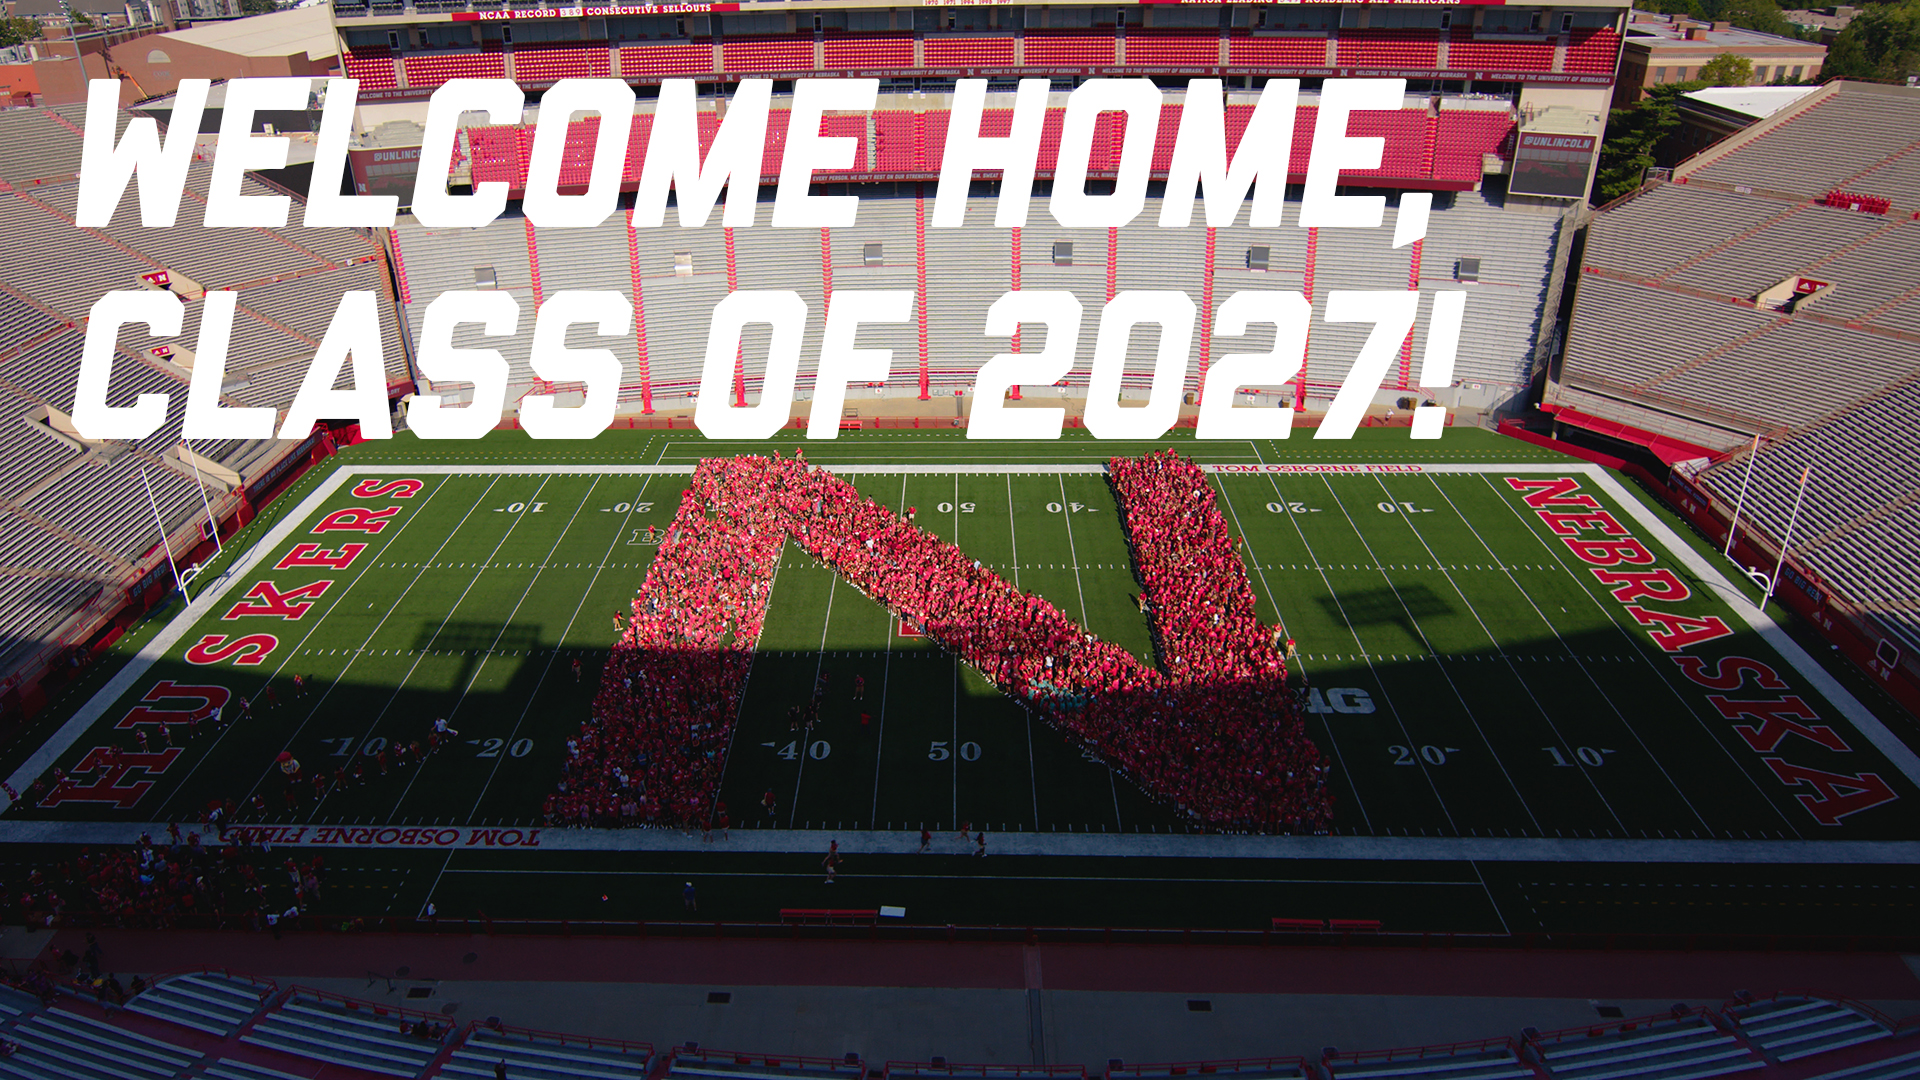 Welcome Home, Class of 2027!